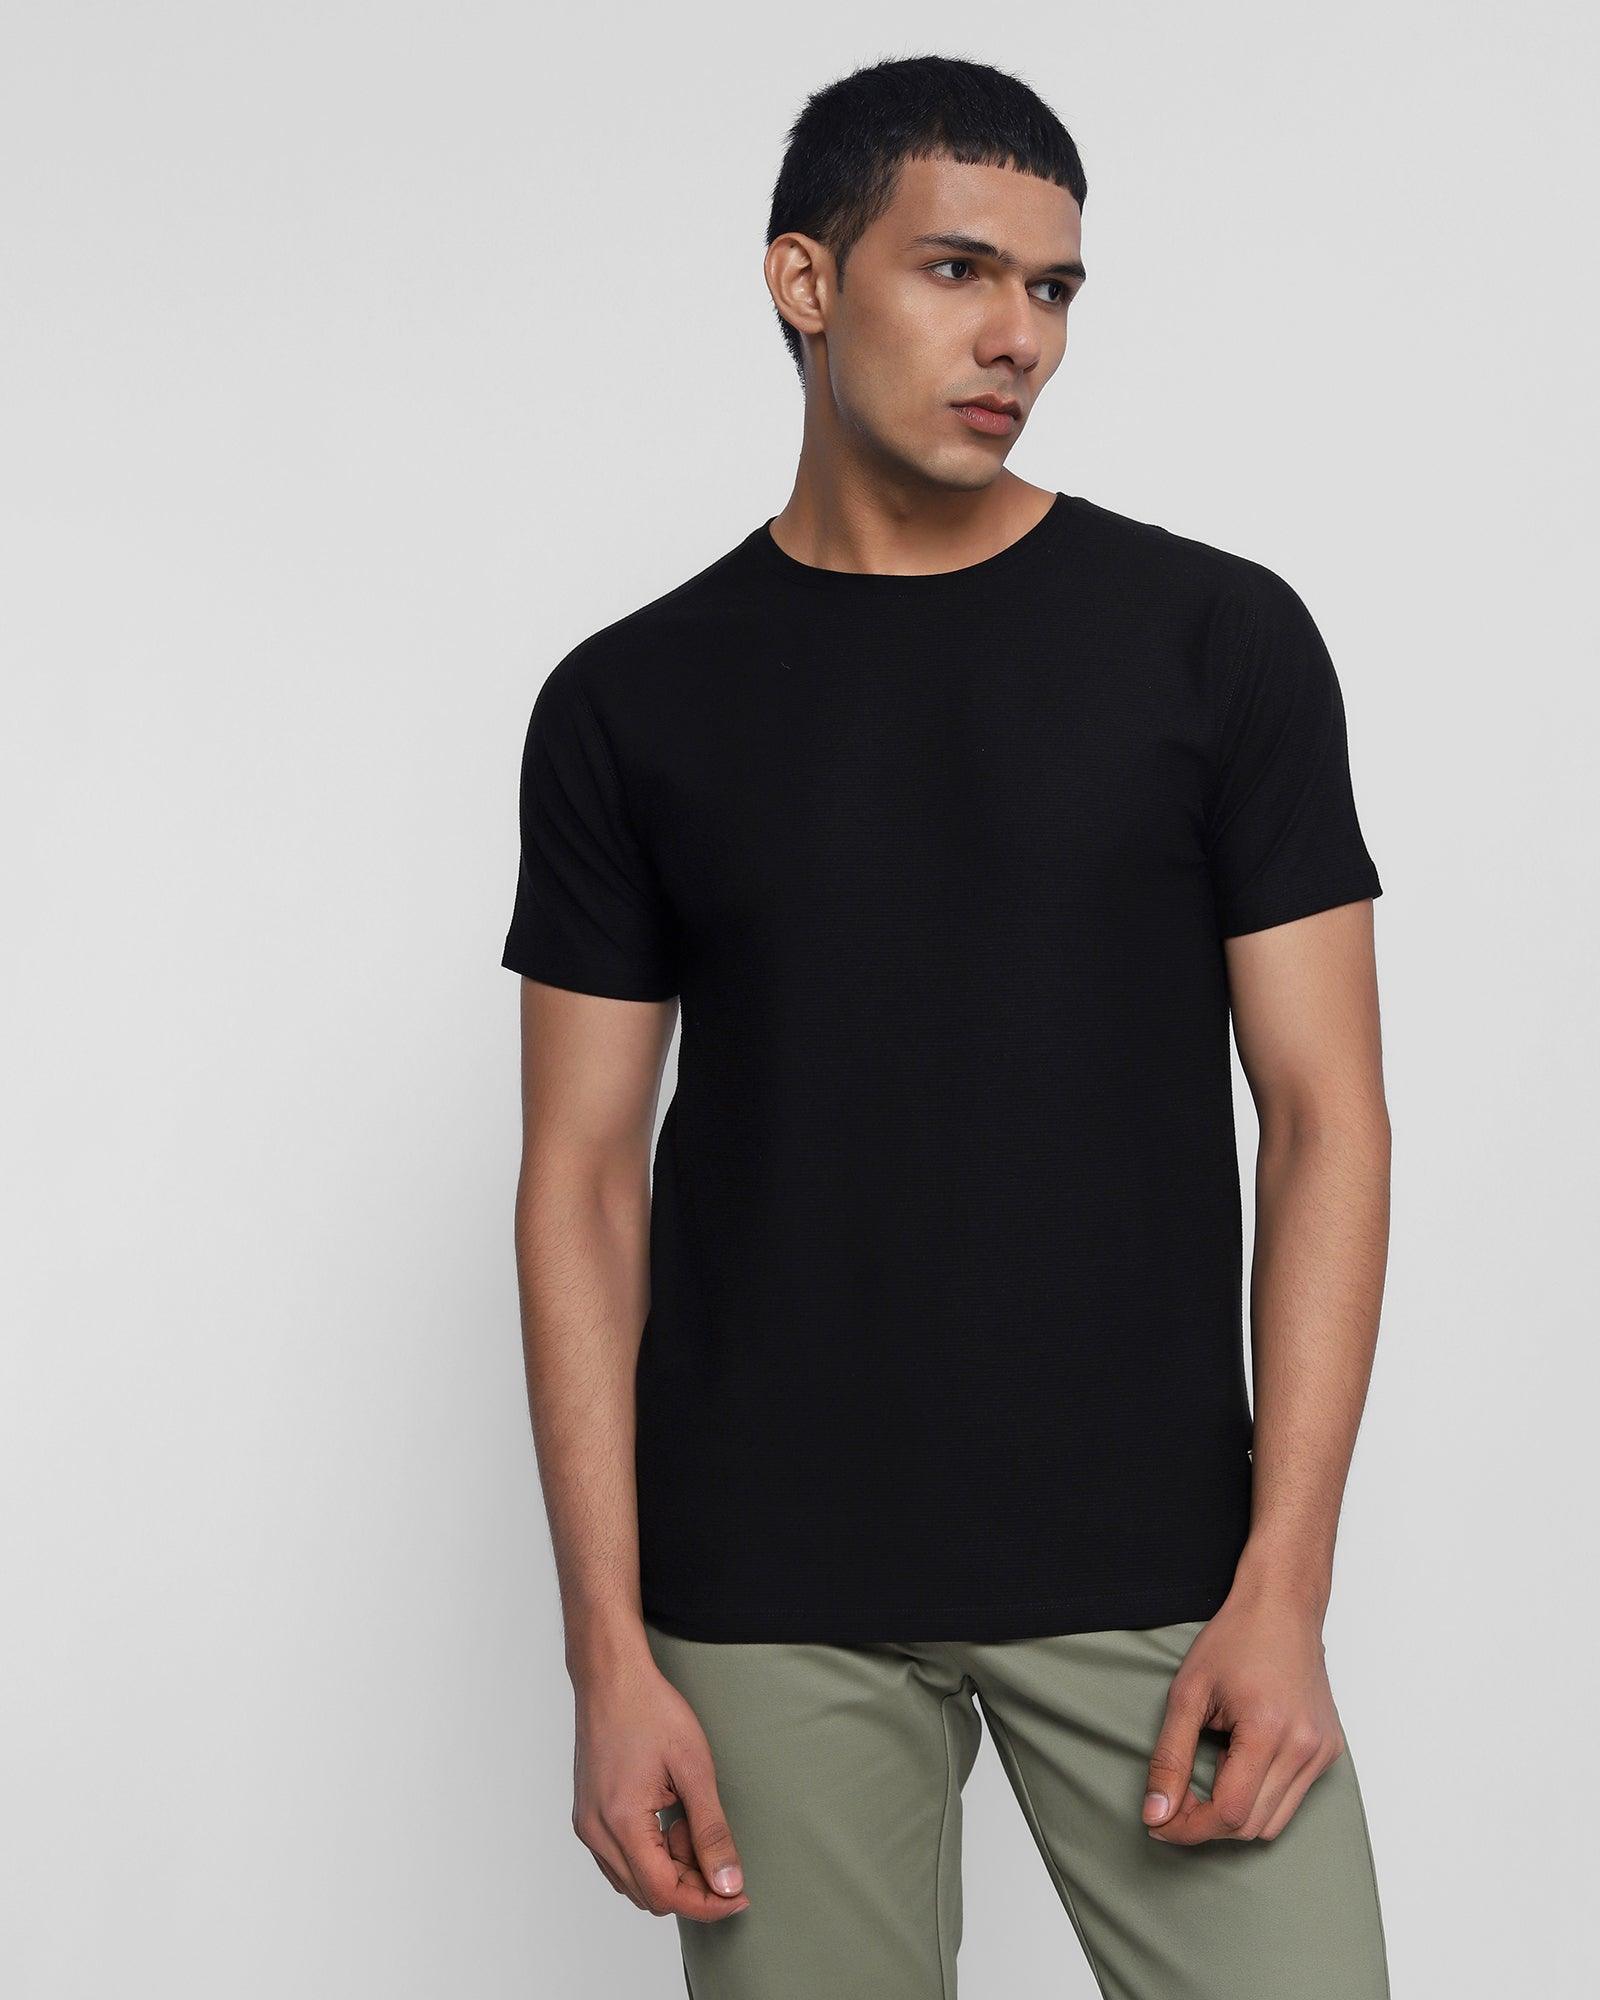 Crew Neck Black Solid T-Shirt - Wall